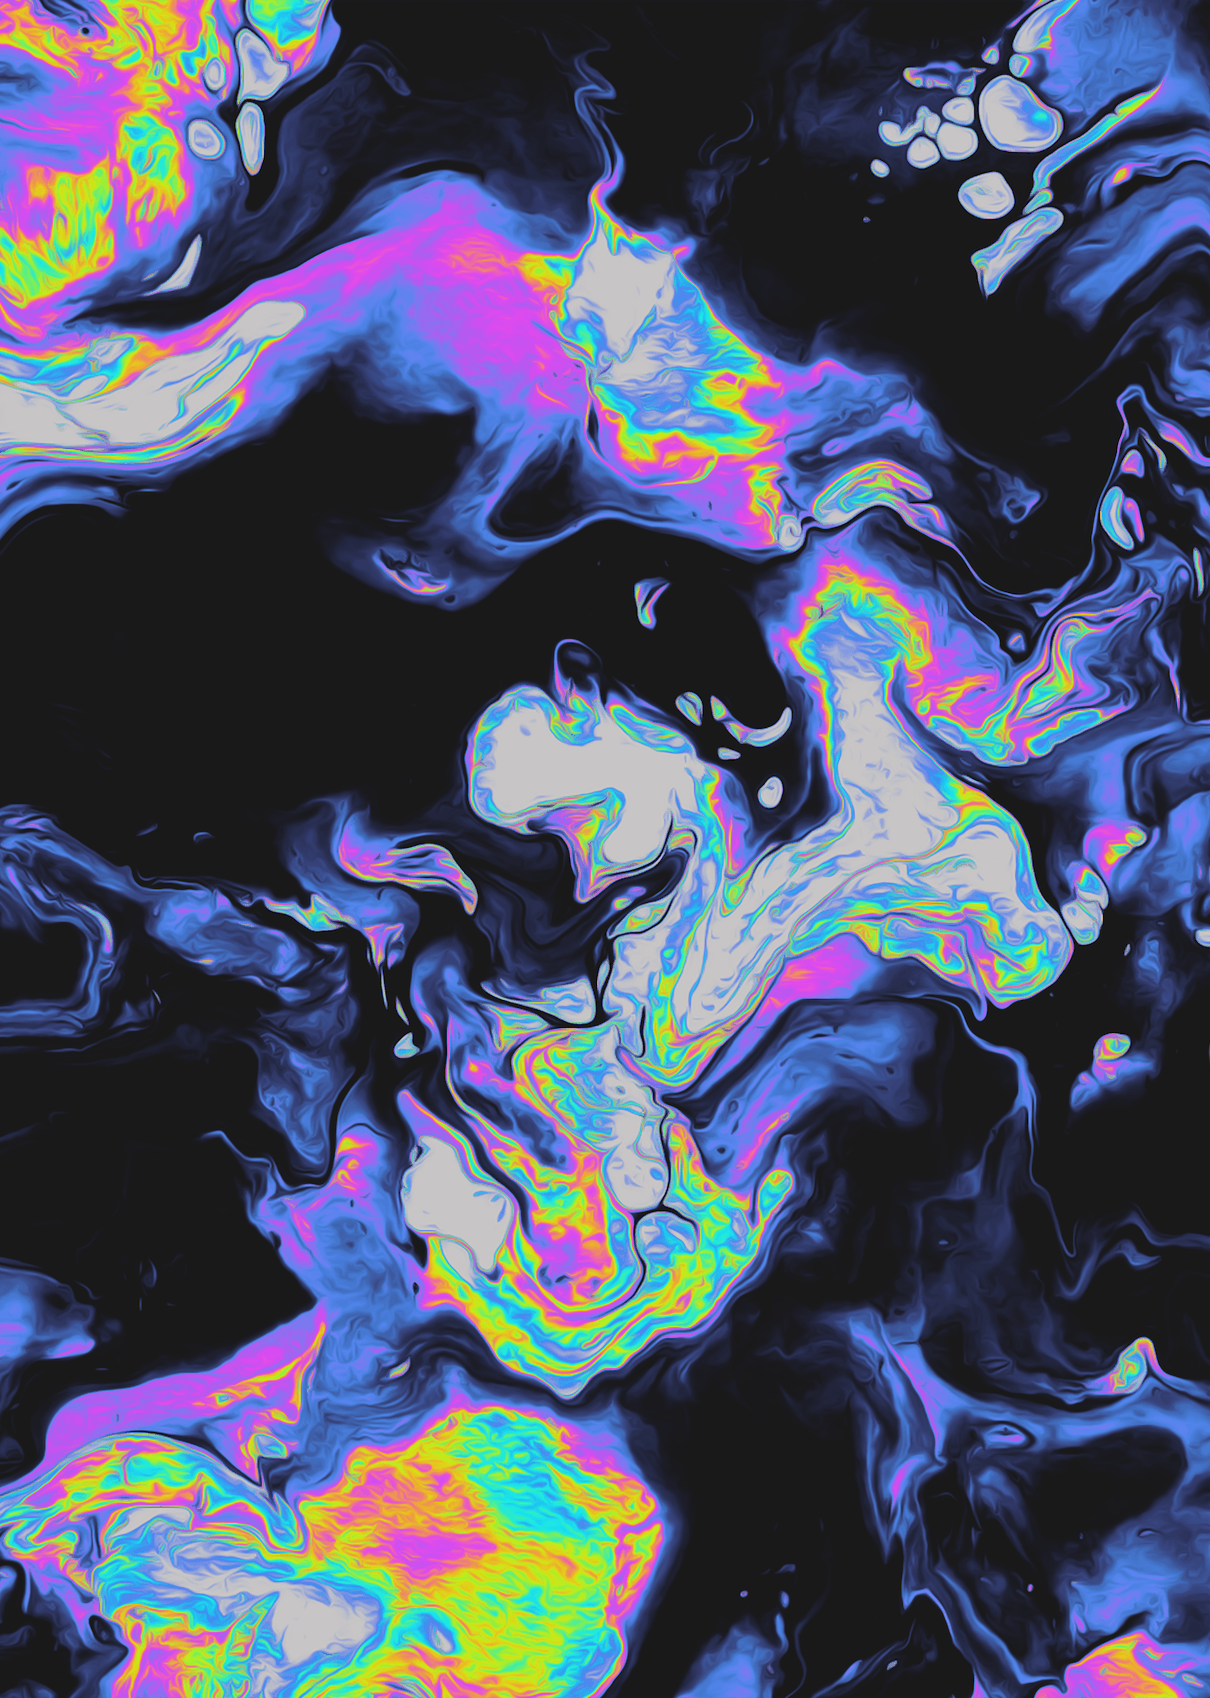 trippy aesthetic computer wallpapers wallpaper cave on trippy aesthetic computer wallpapers